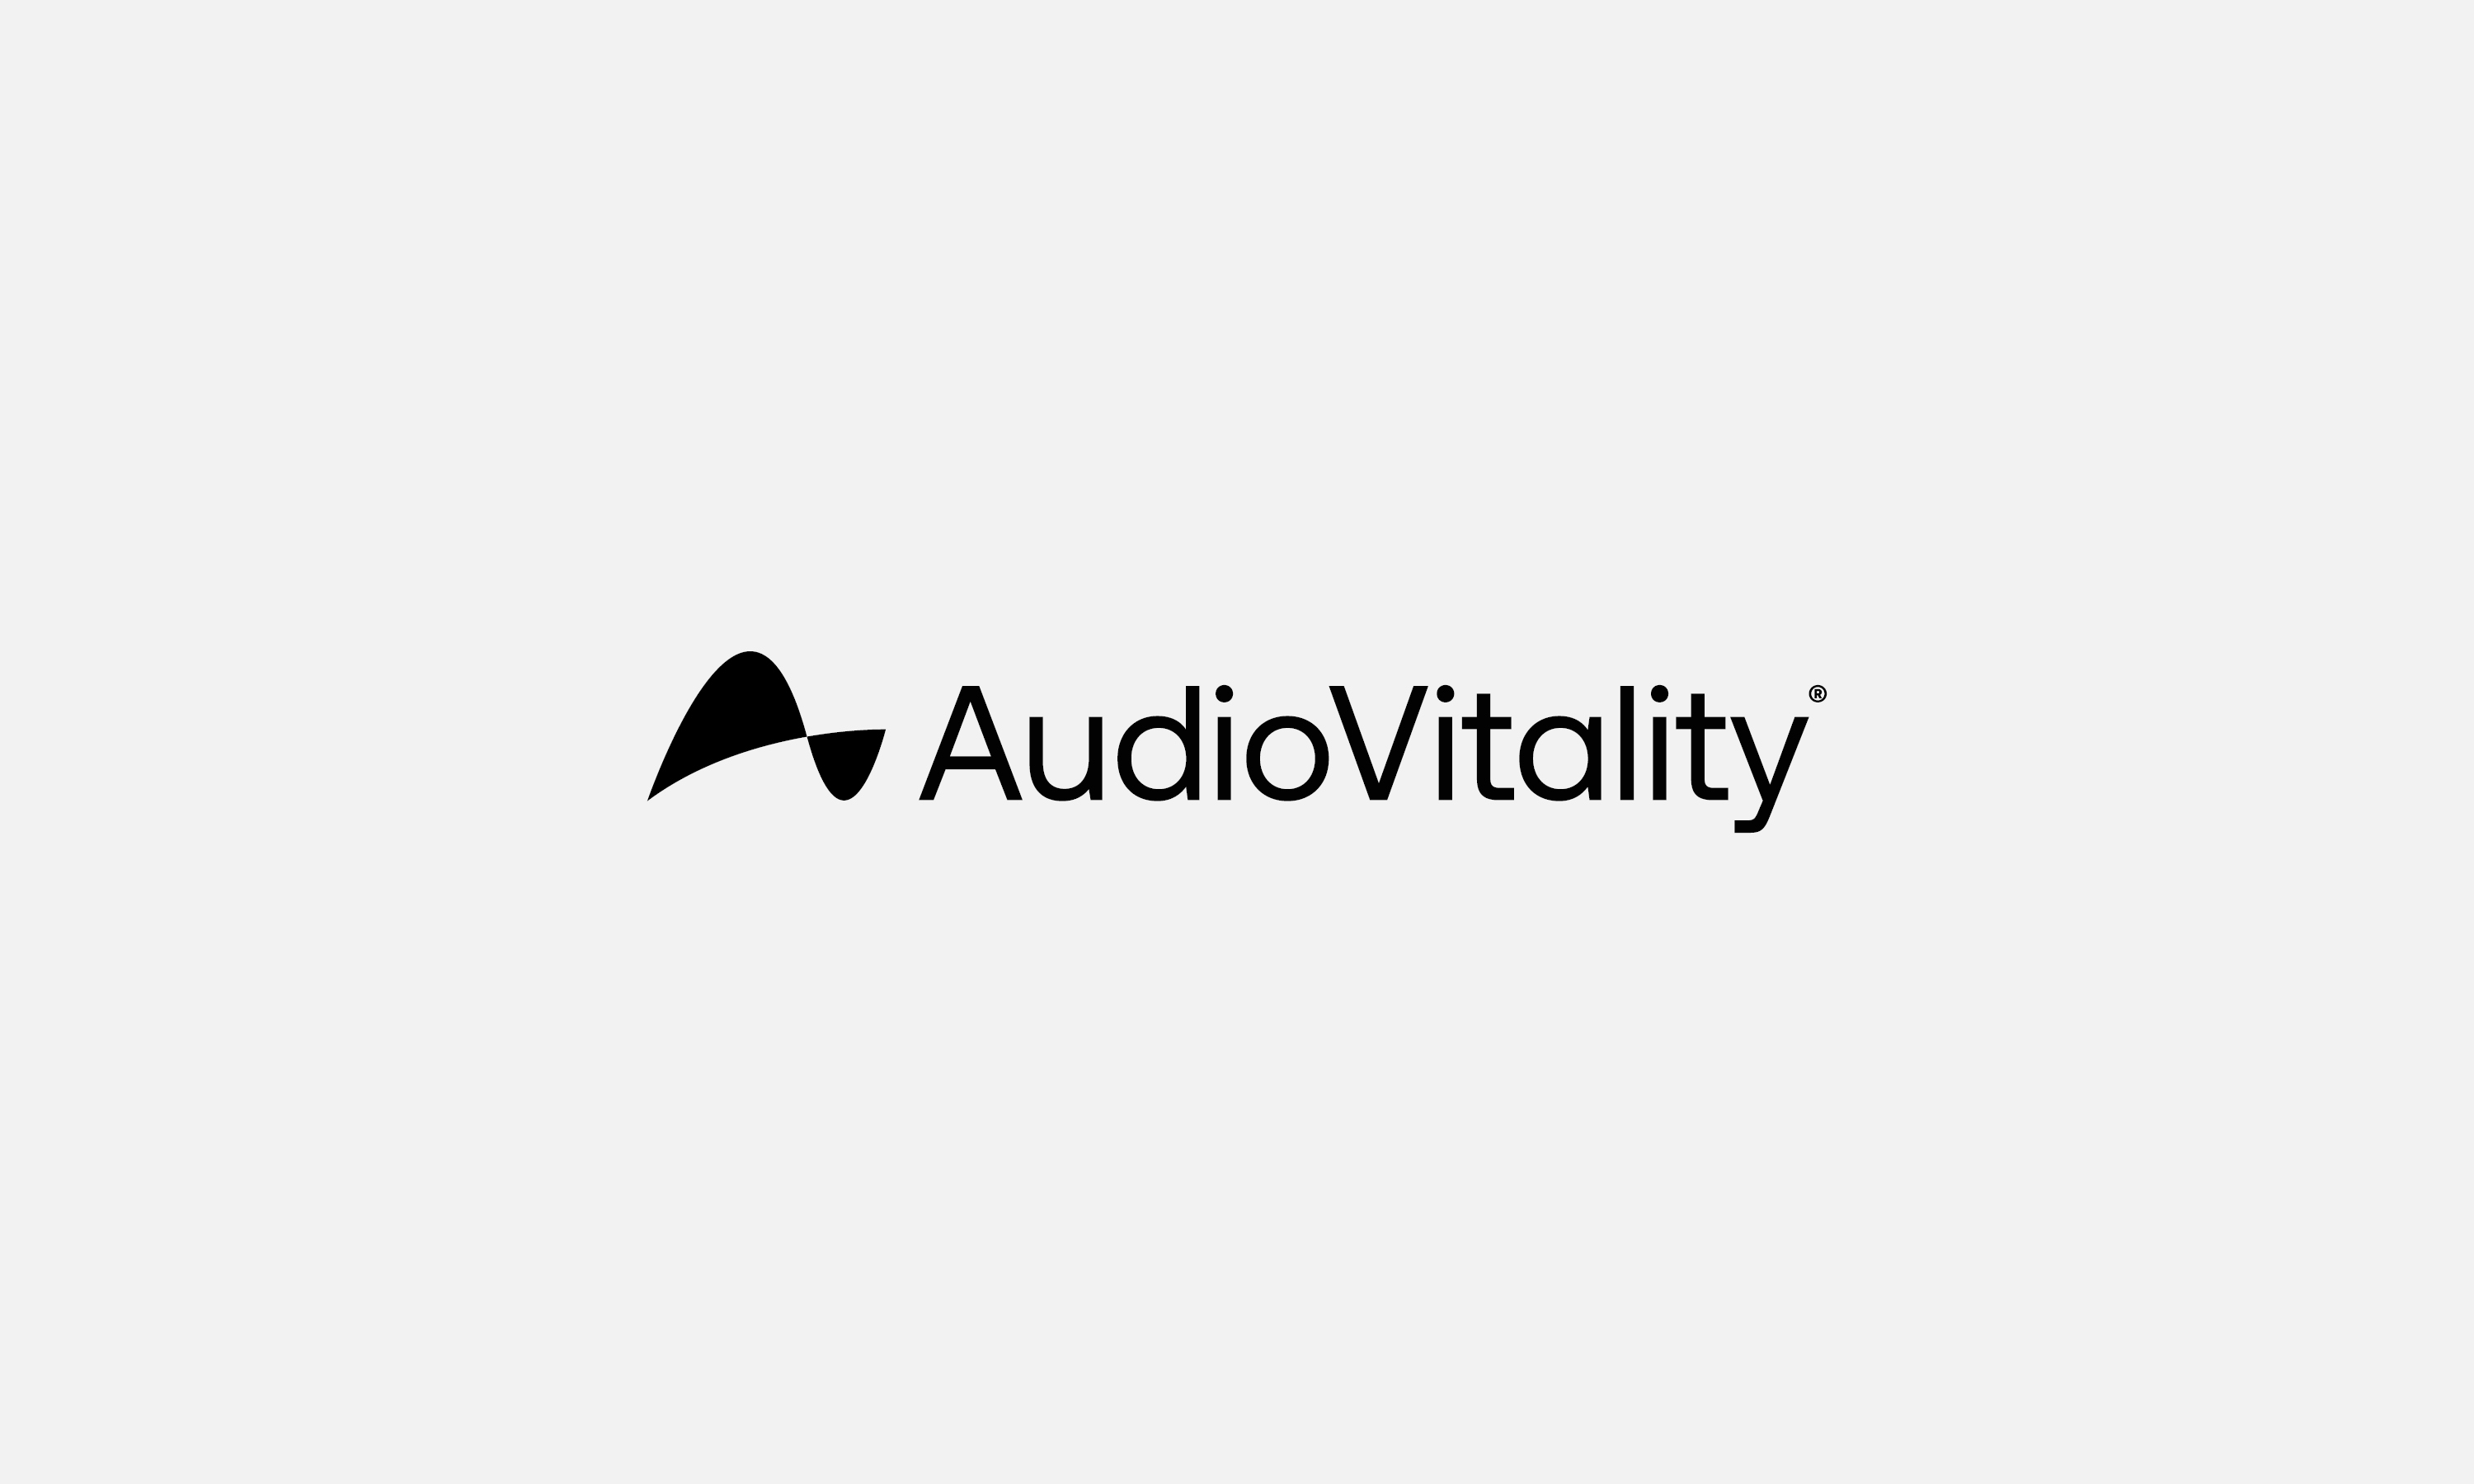 AudioVitality – When Audio Technology Evolves Into an Iconic Brand